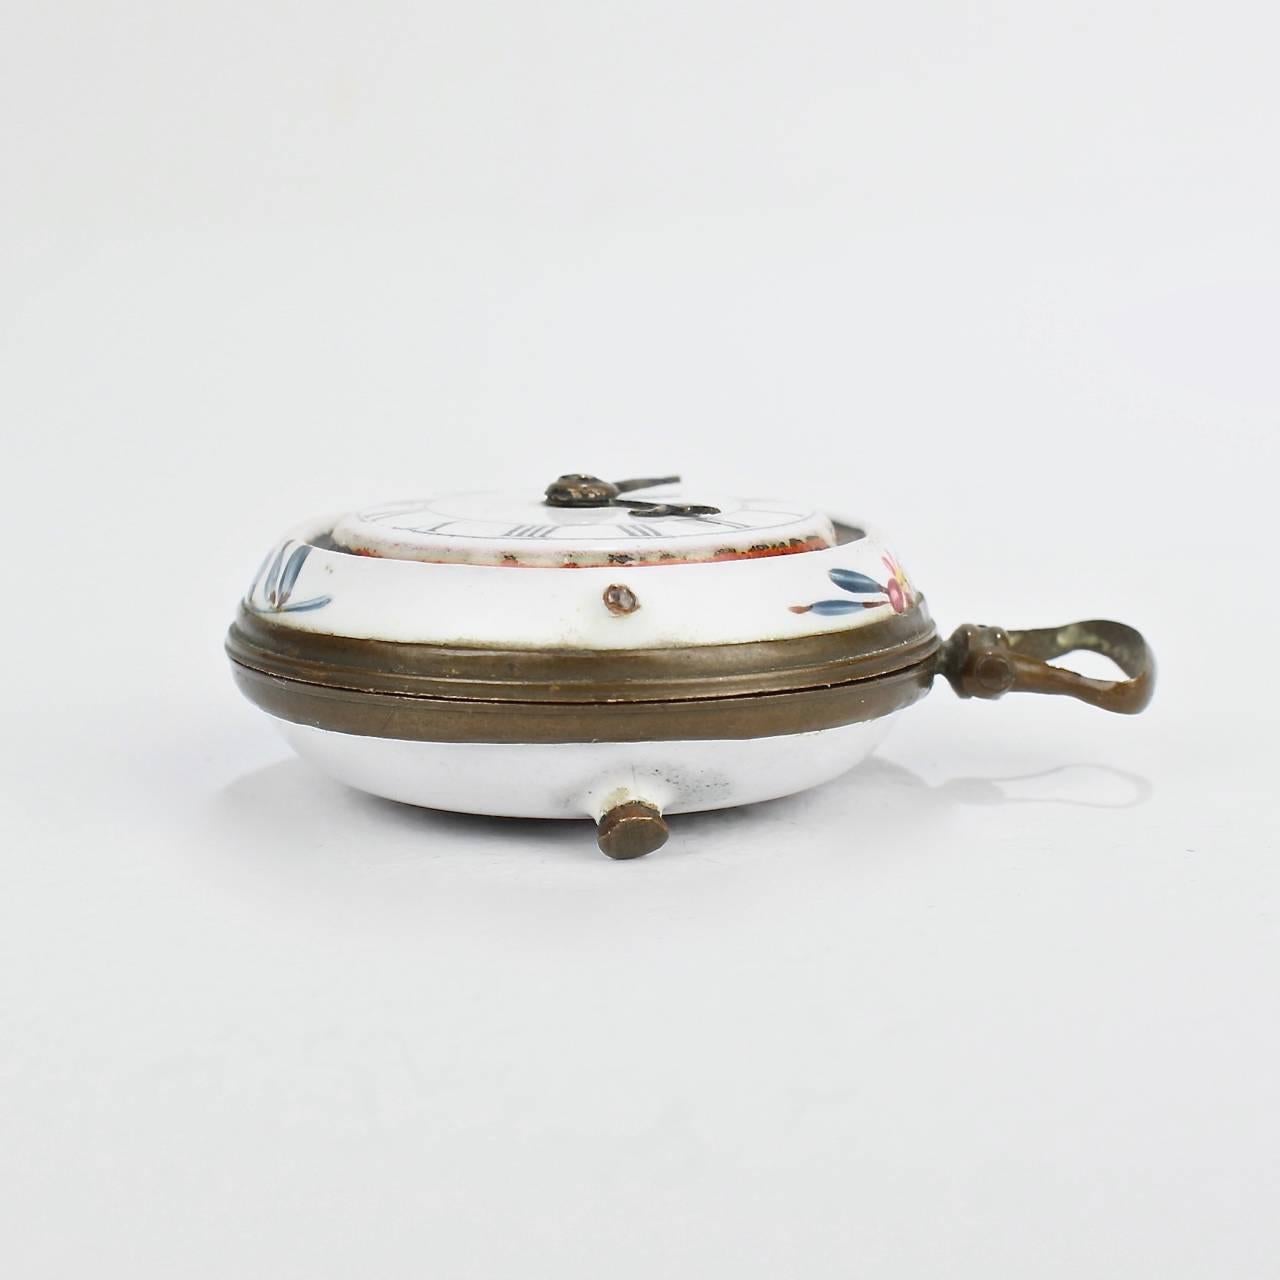 18th Century and Earlier Antique English Battersea Bilston Enamel Pocket Watch Form Snuff or Patch Box